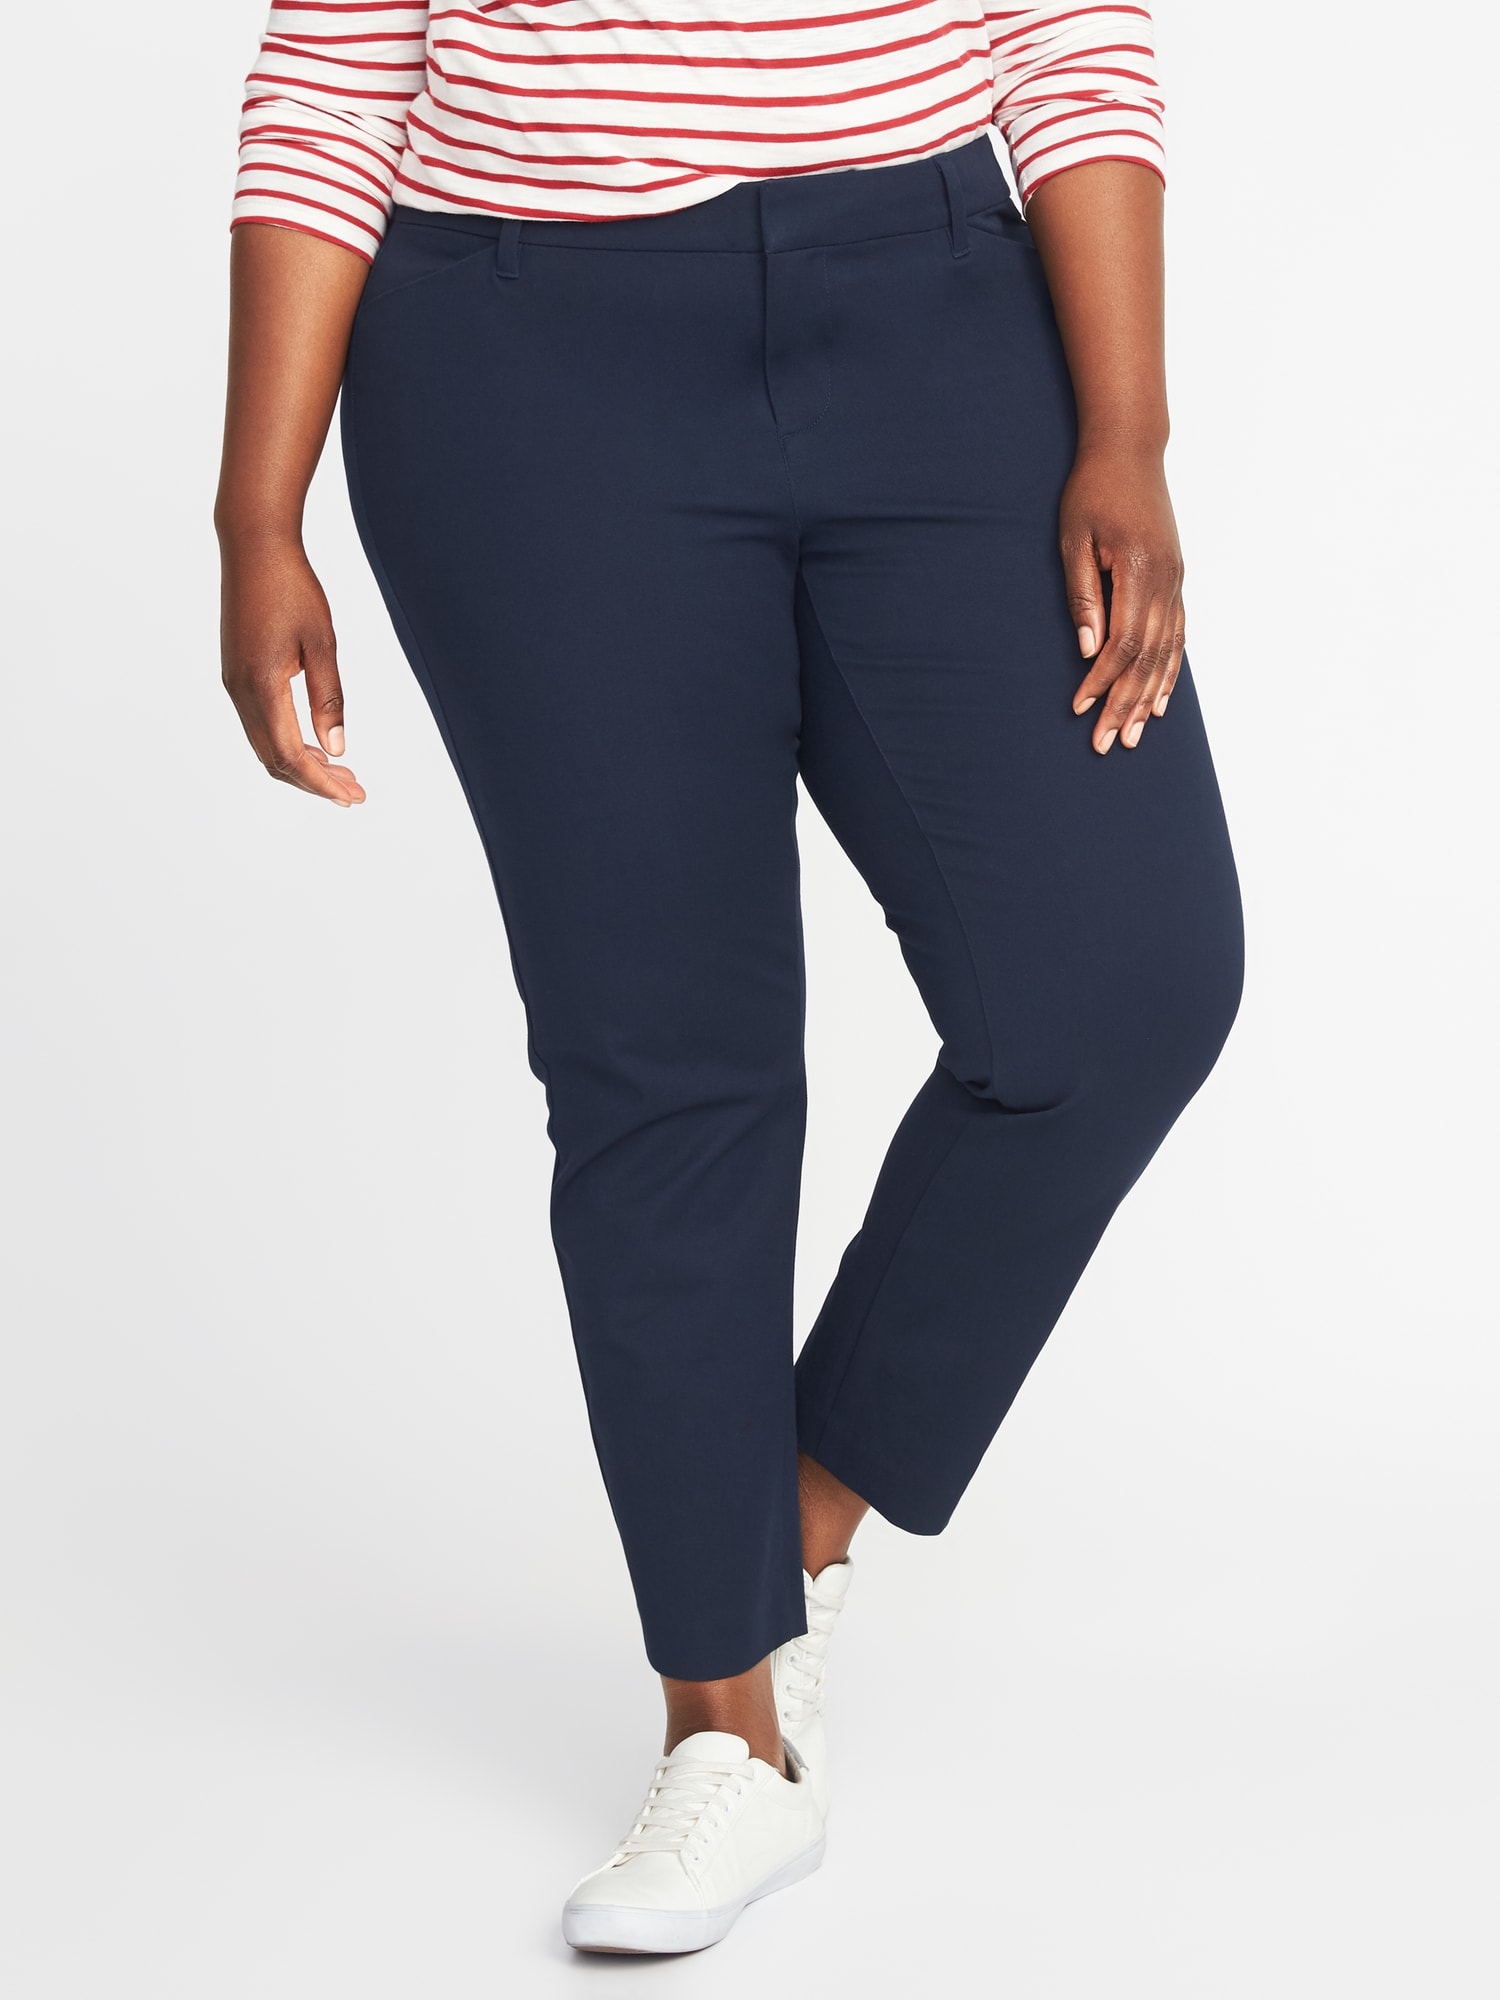 old navy pixie jeans